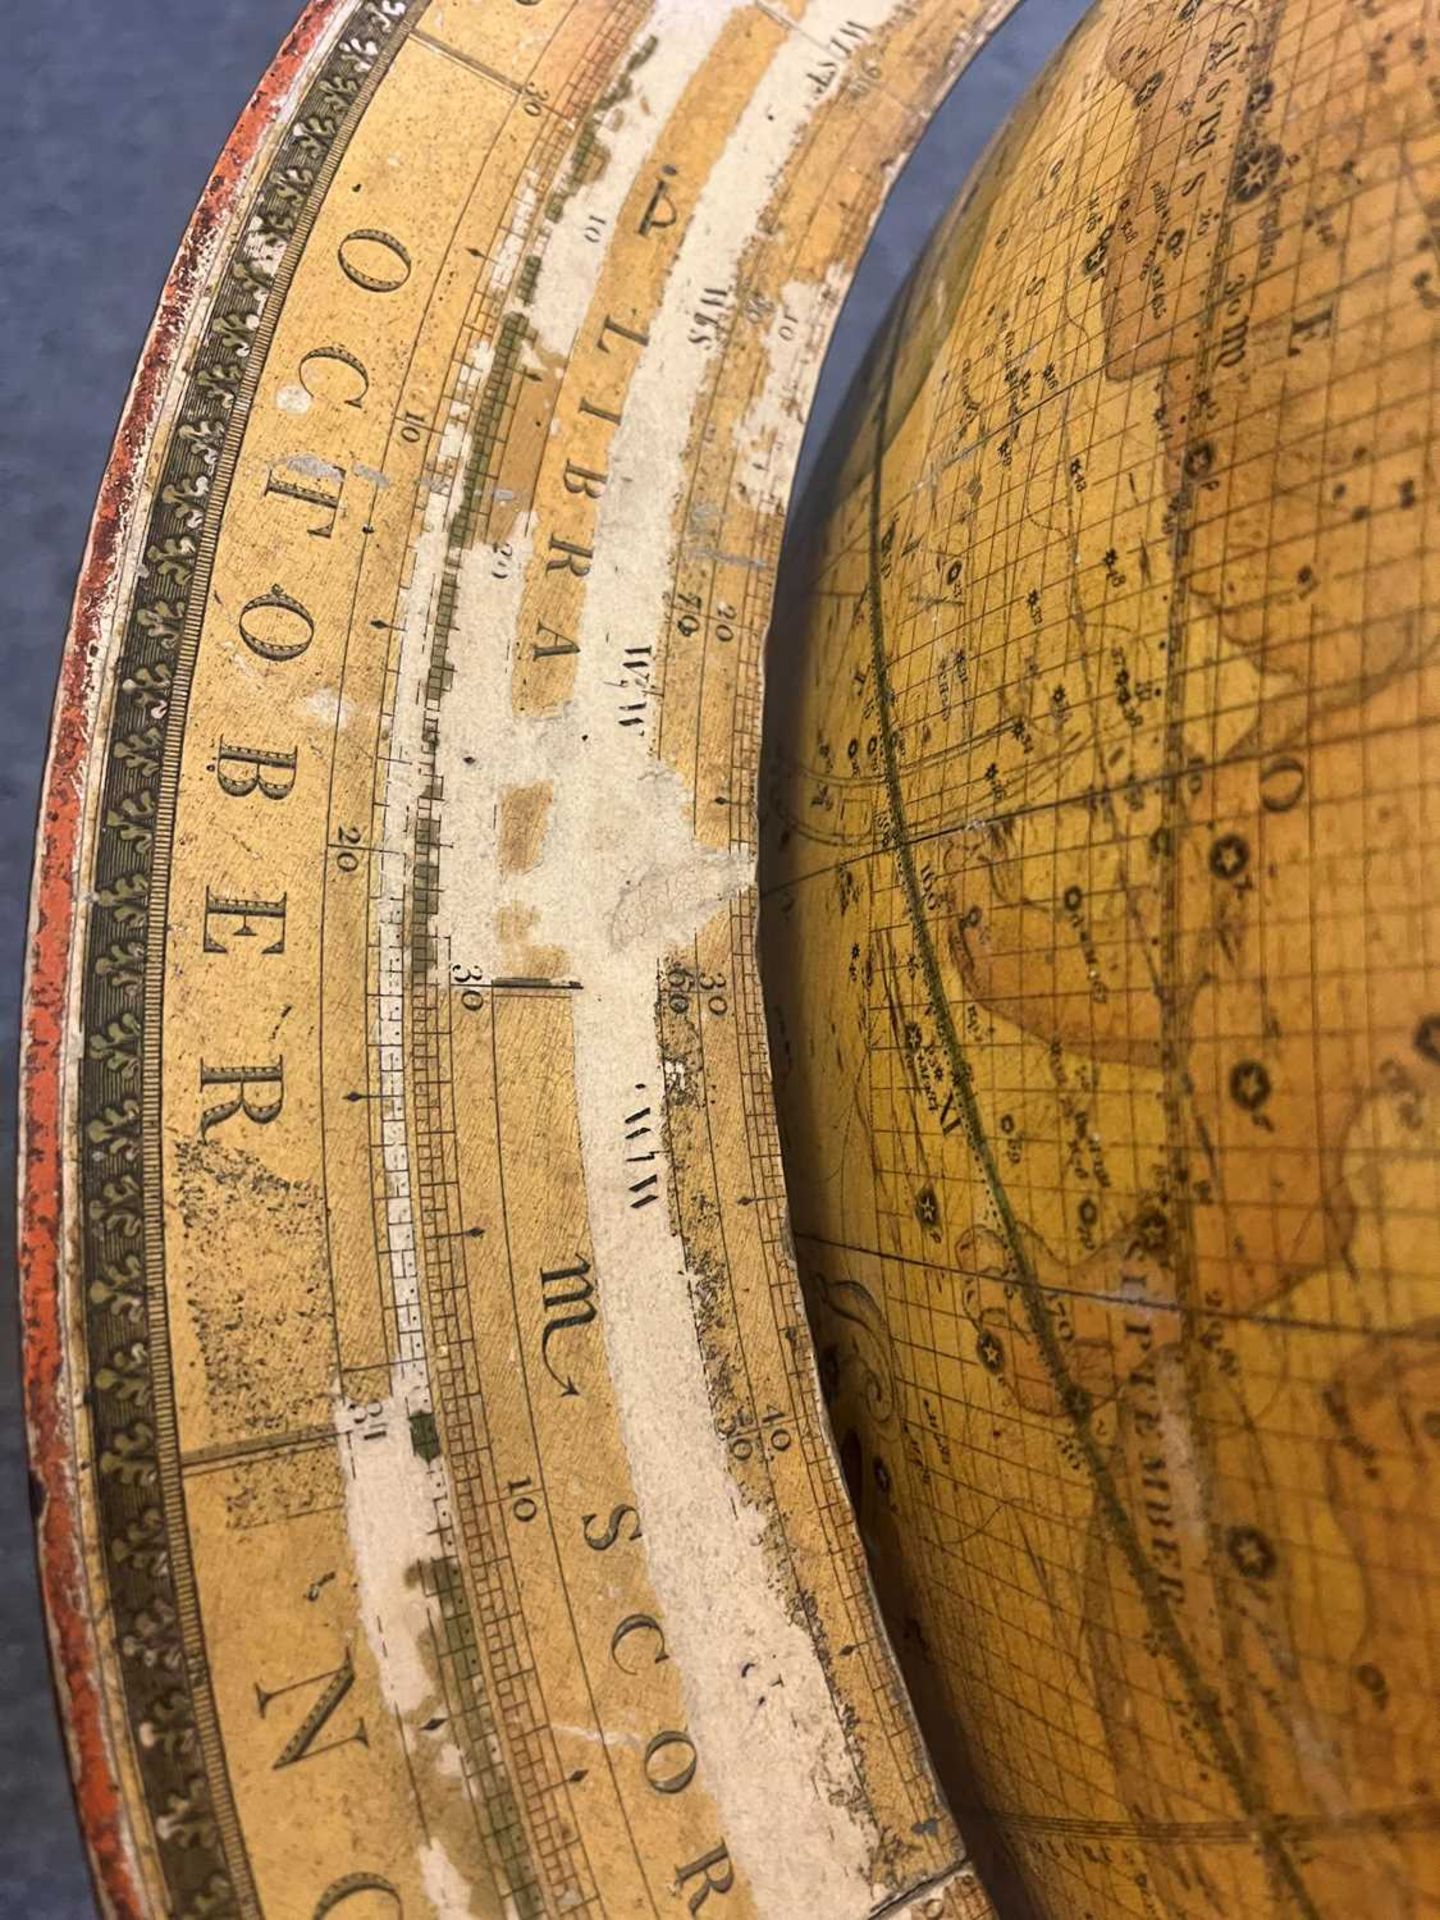 A large celestial library globe by J & W Cary, - Image 36 of 84